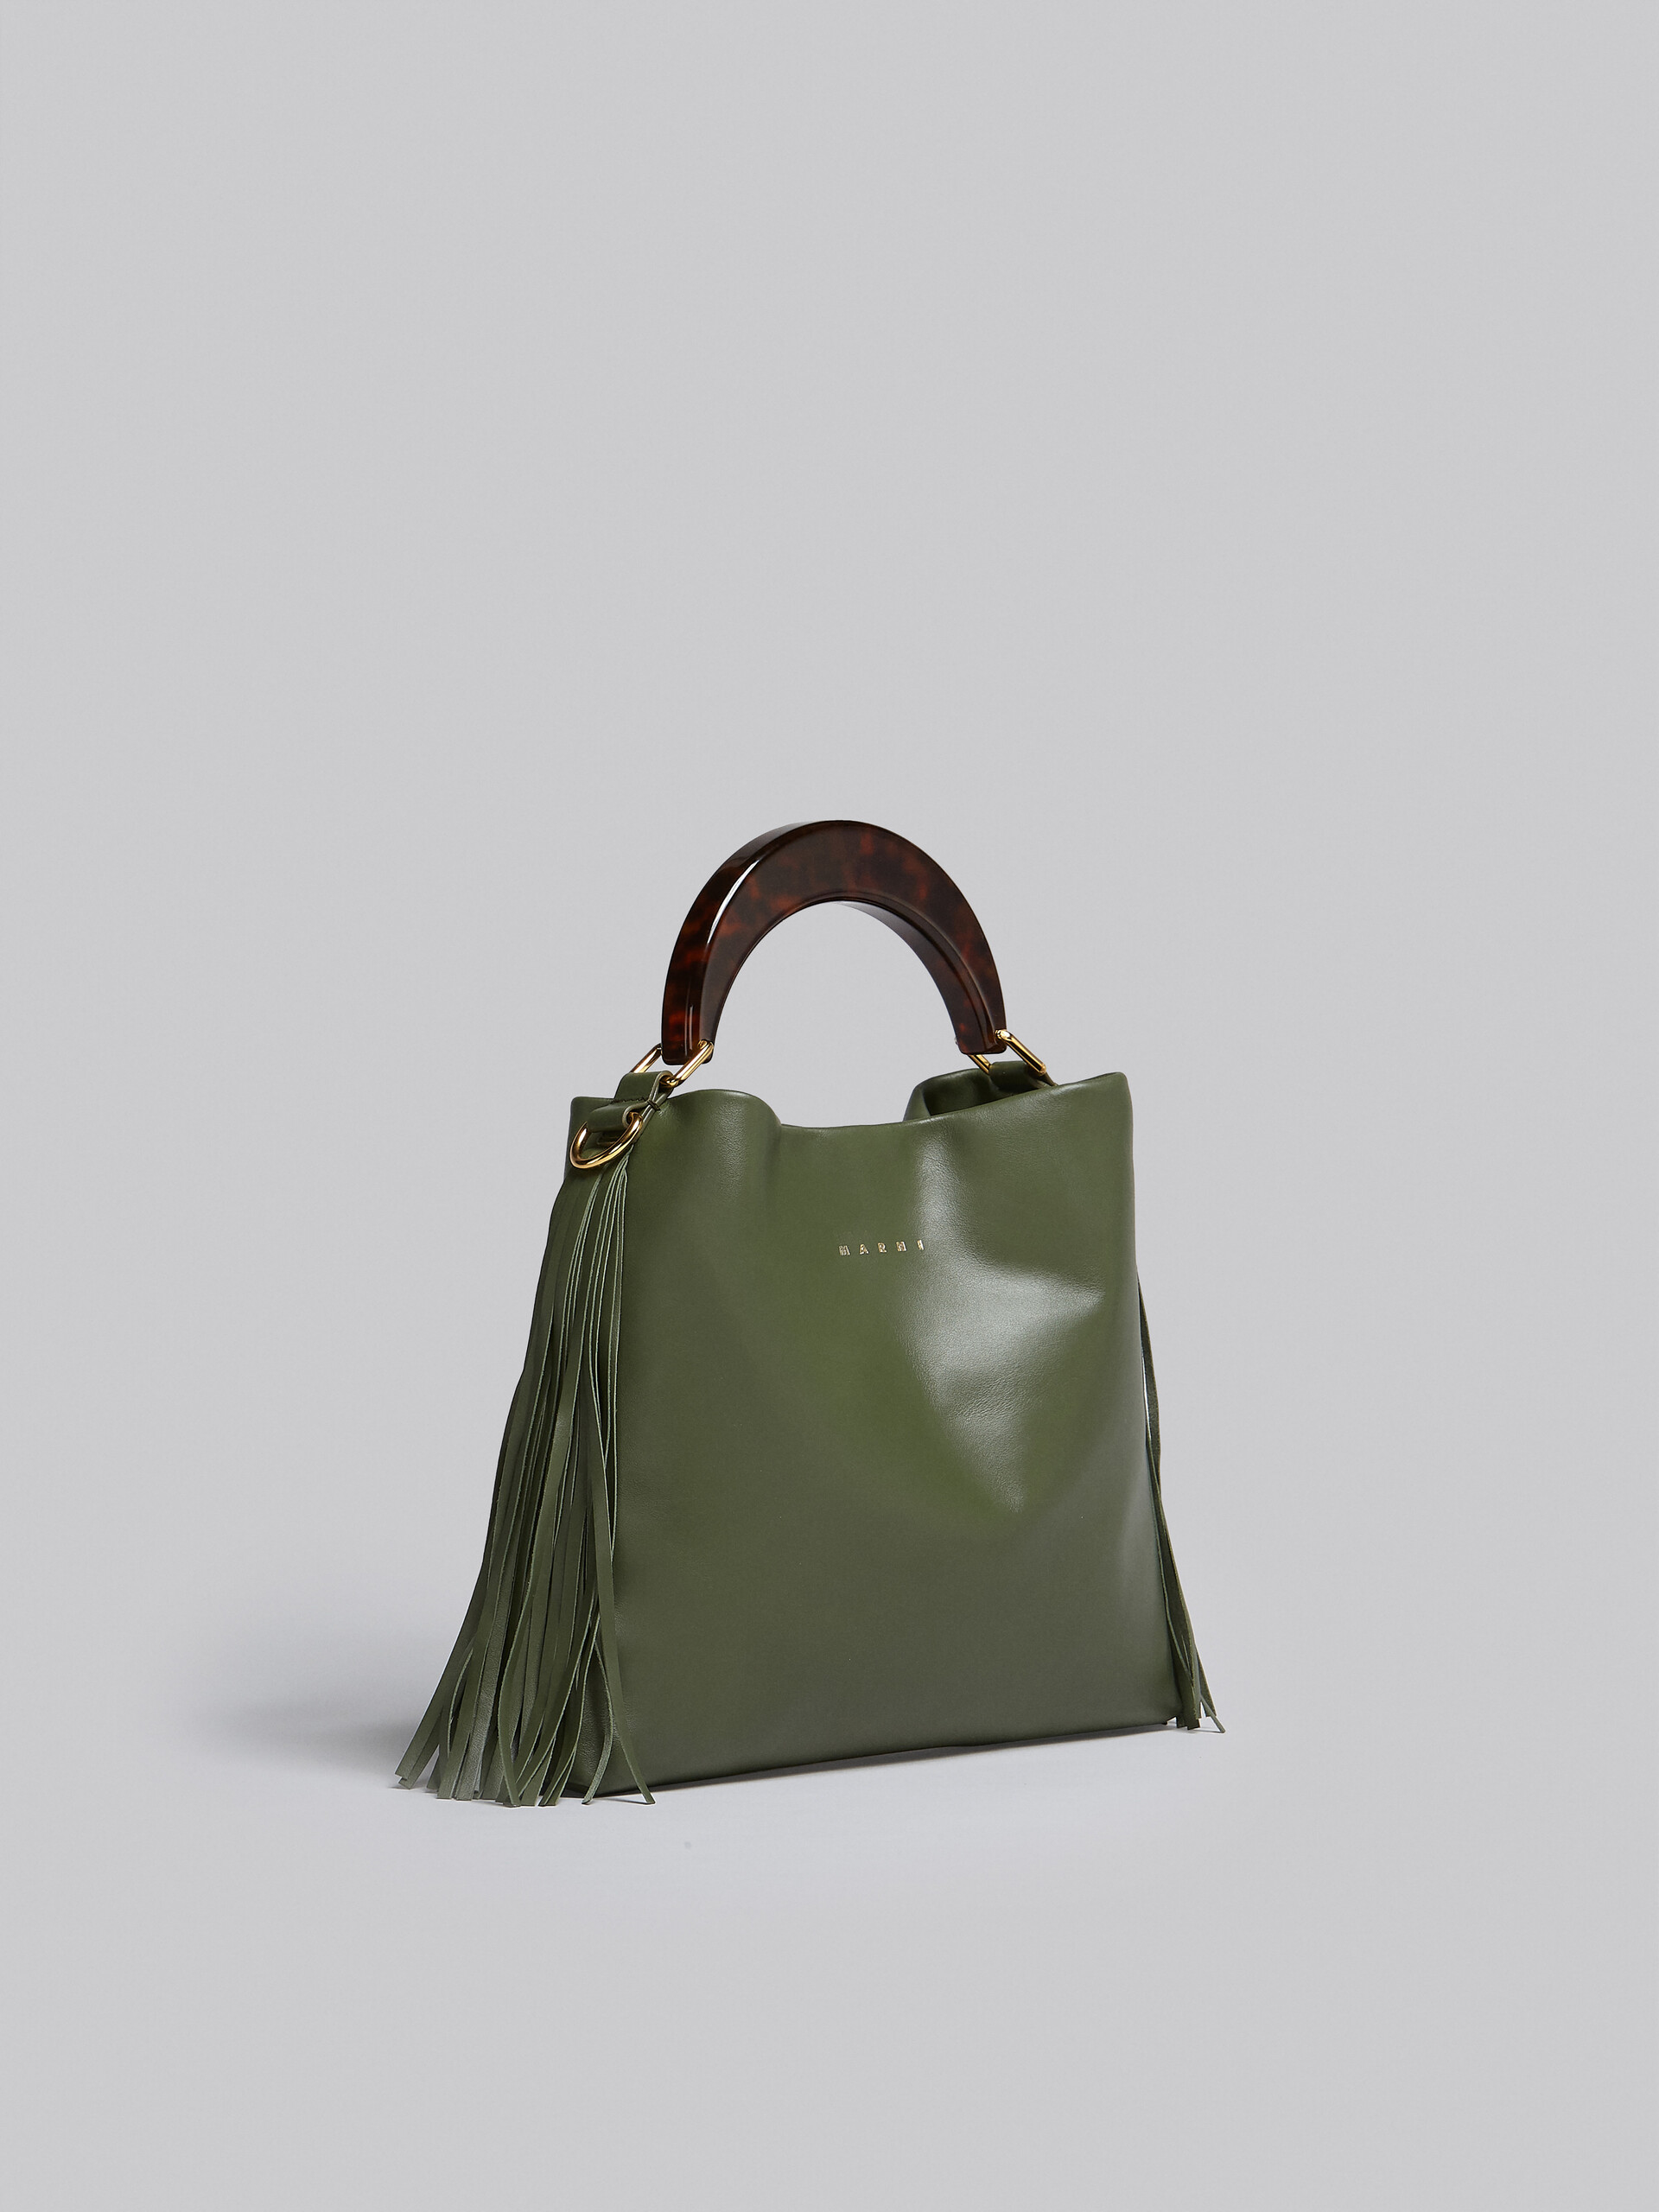 Venice Small Bag in green leather with fringes - Shoulder Bag - Image 5